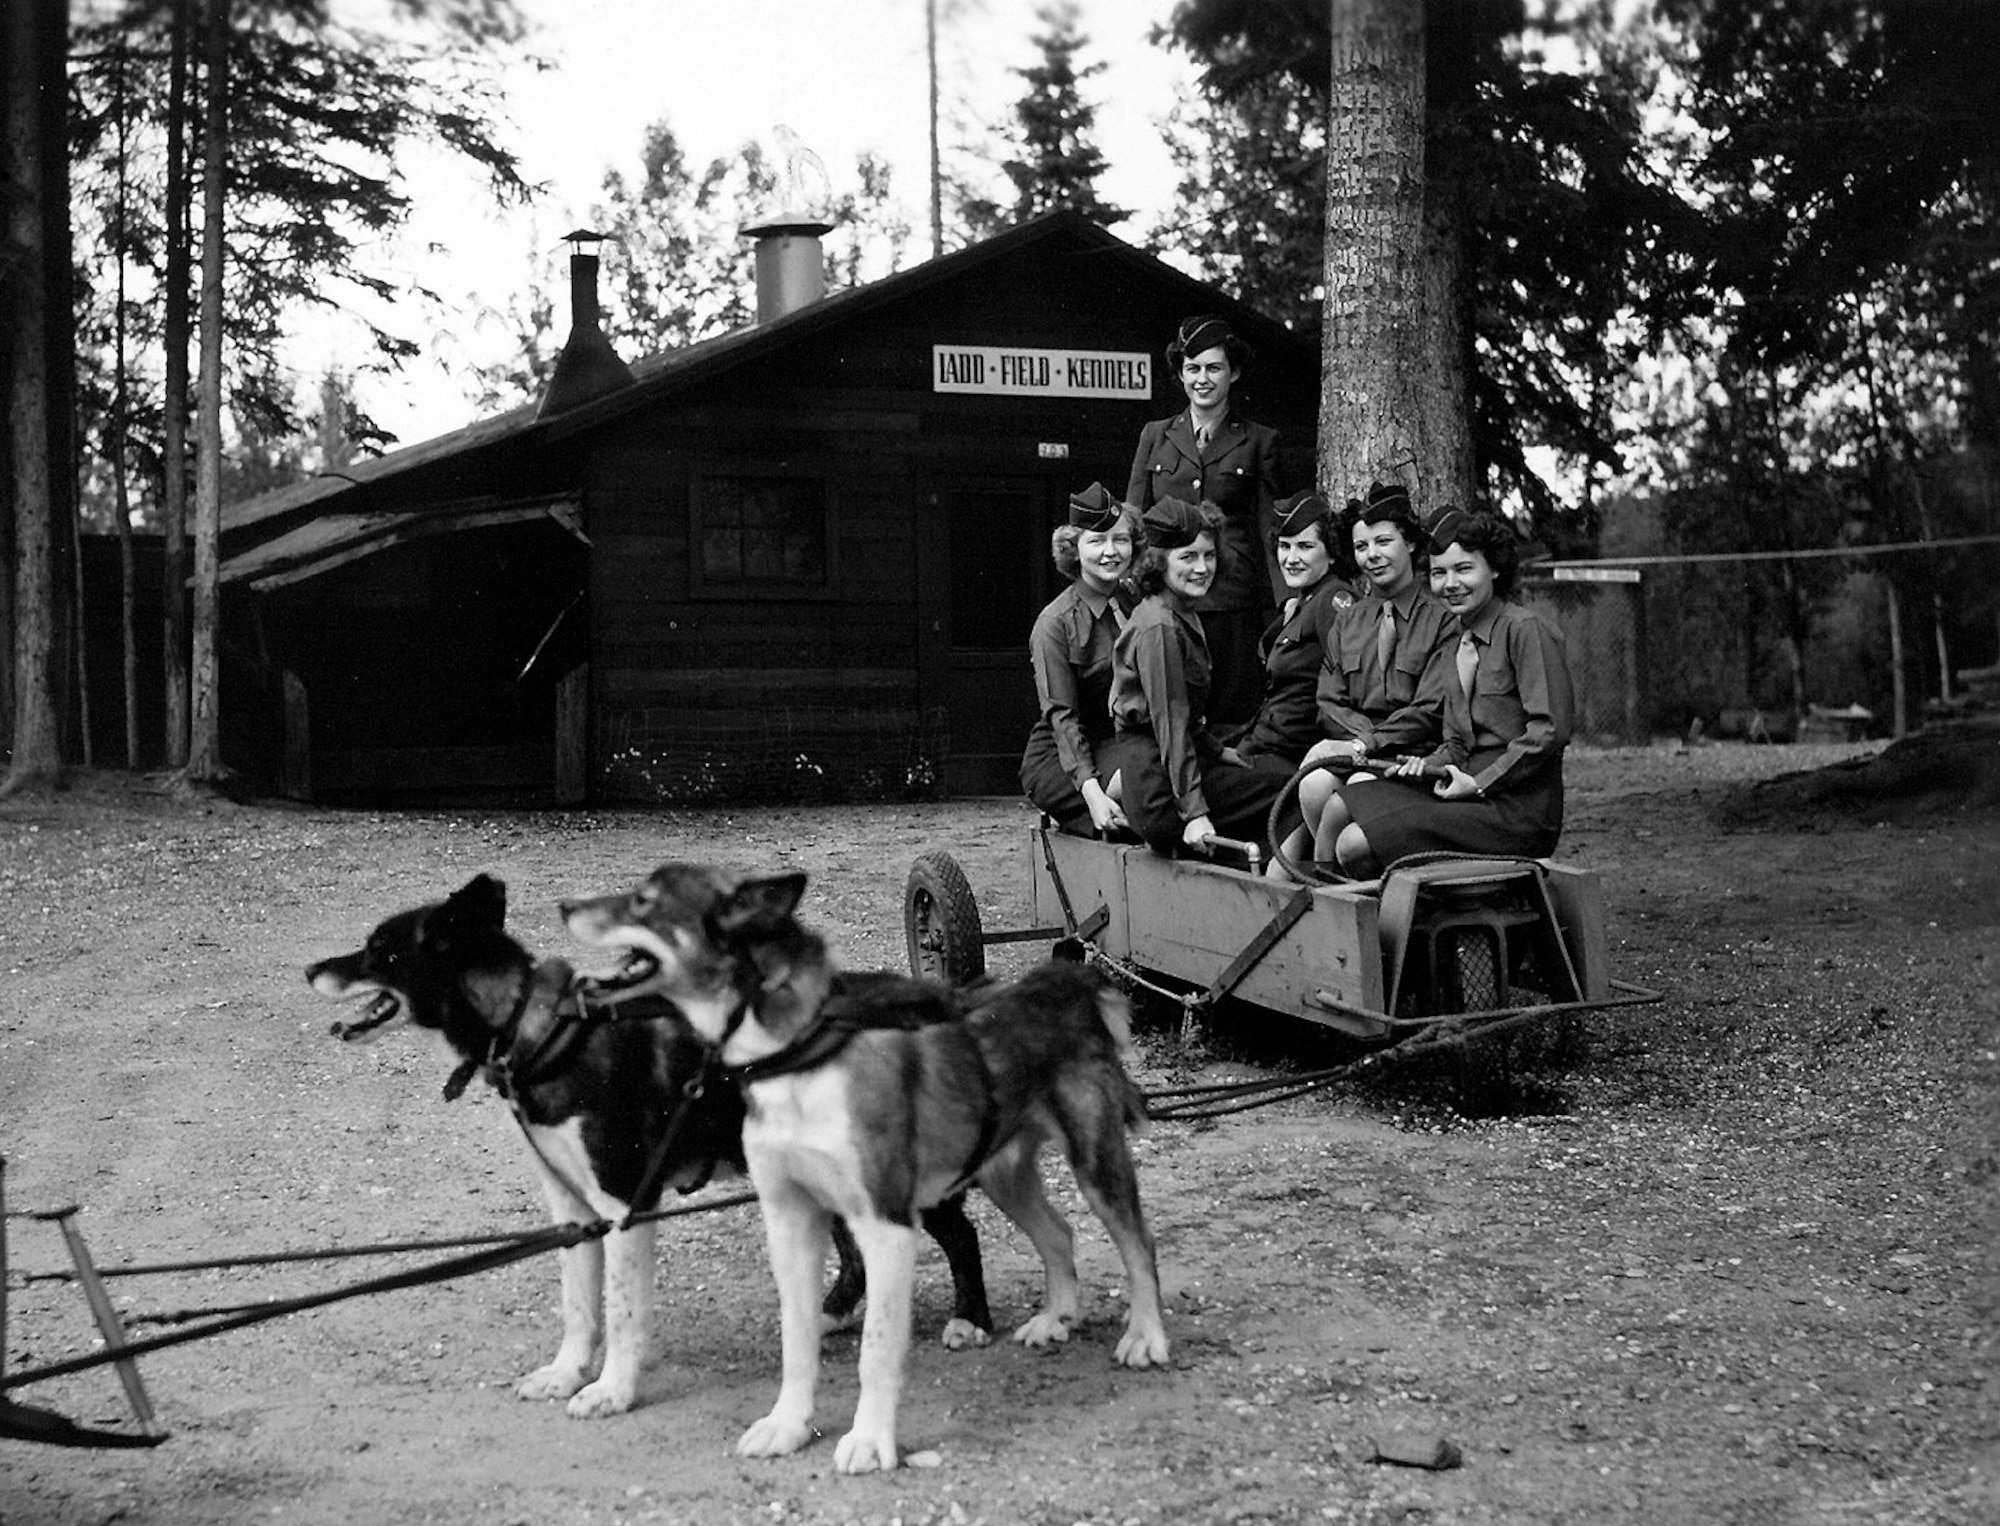 Women's Army Corps members pose for a photo at the Ladd Field kennels circa 1945. (Photo courtesy of Fort Wainwright archives)